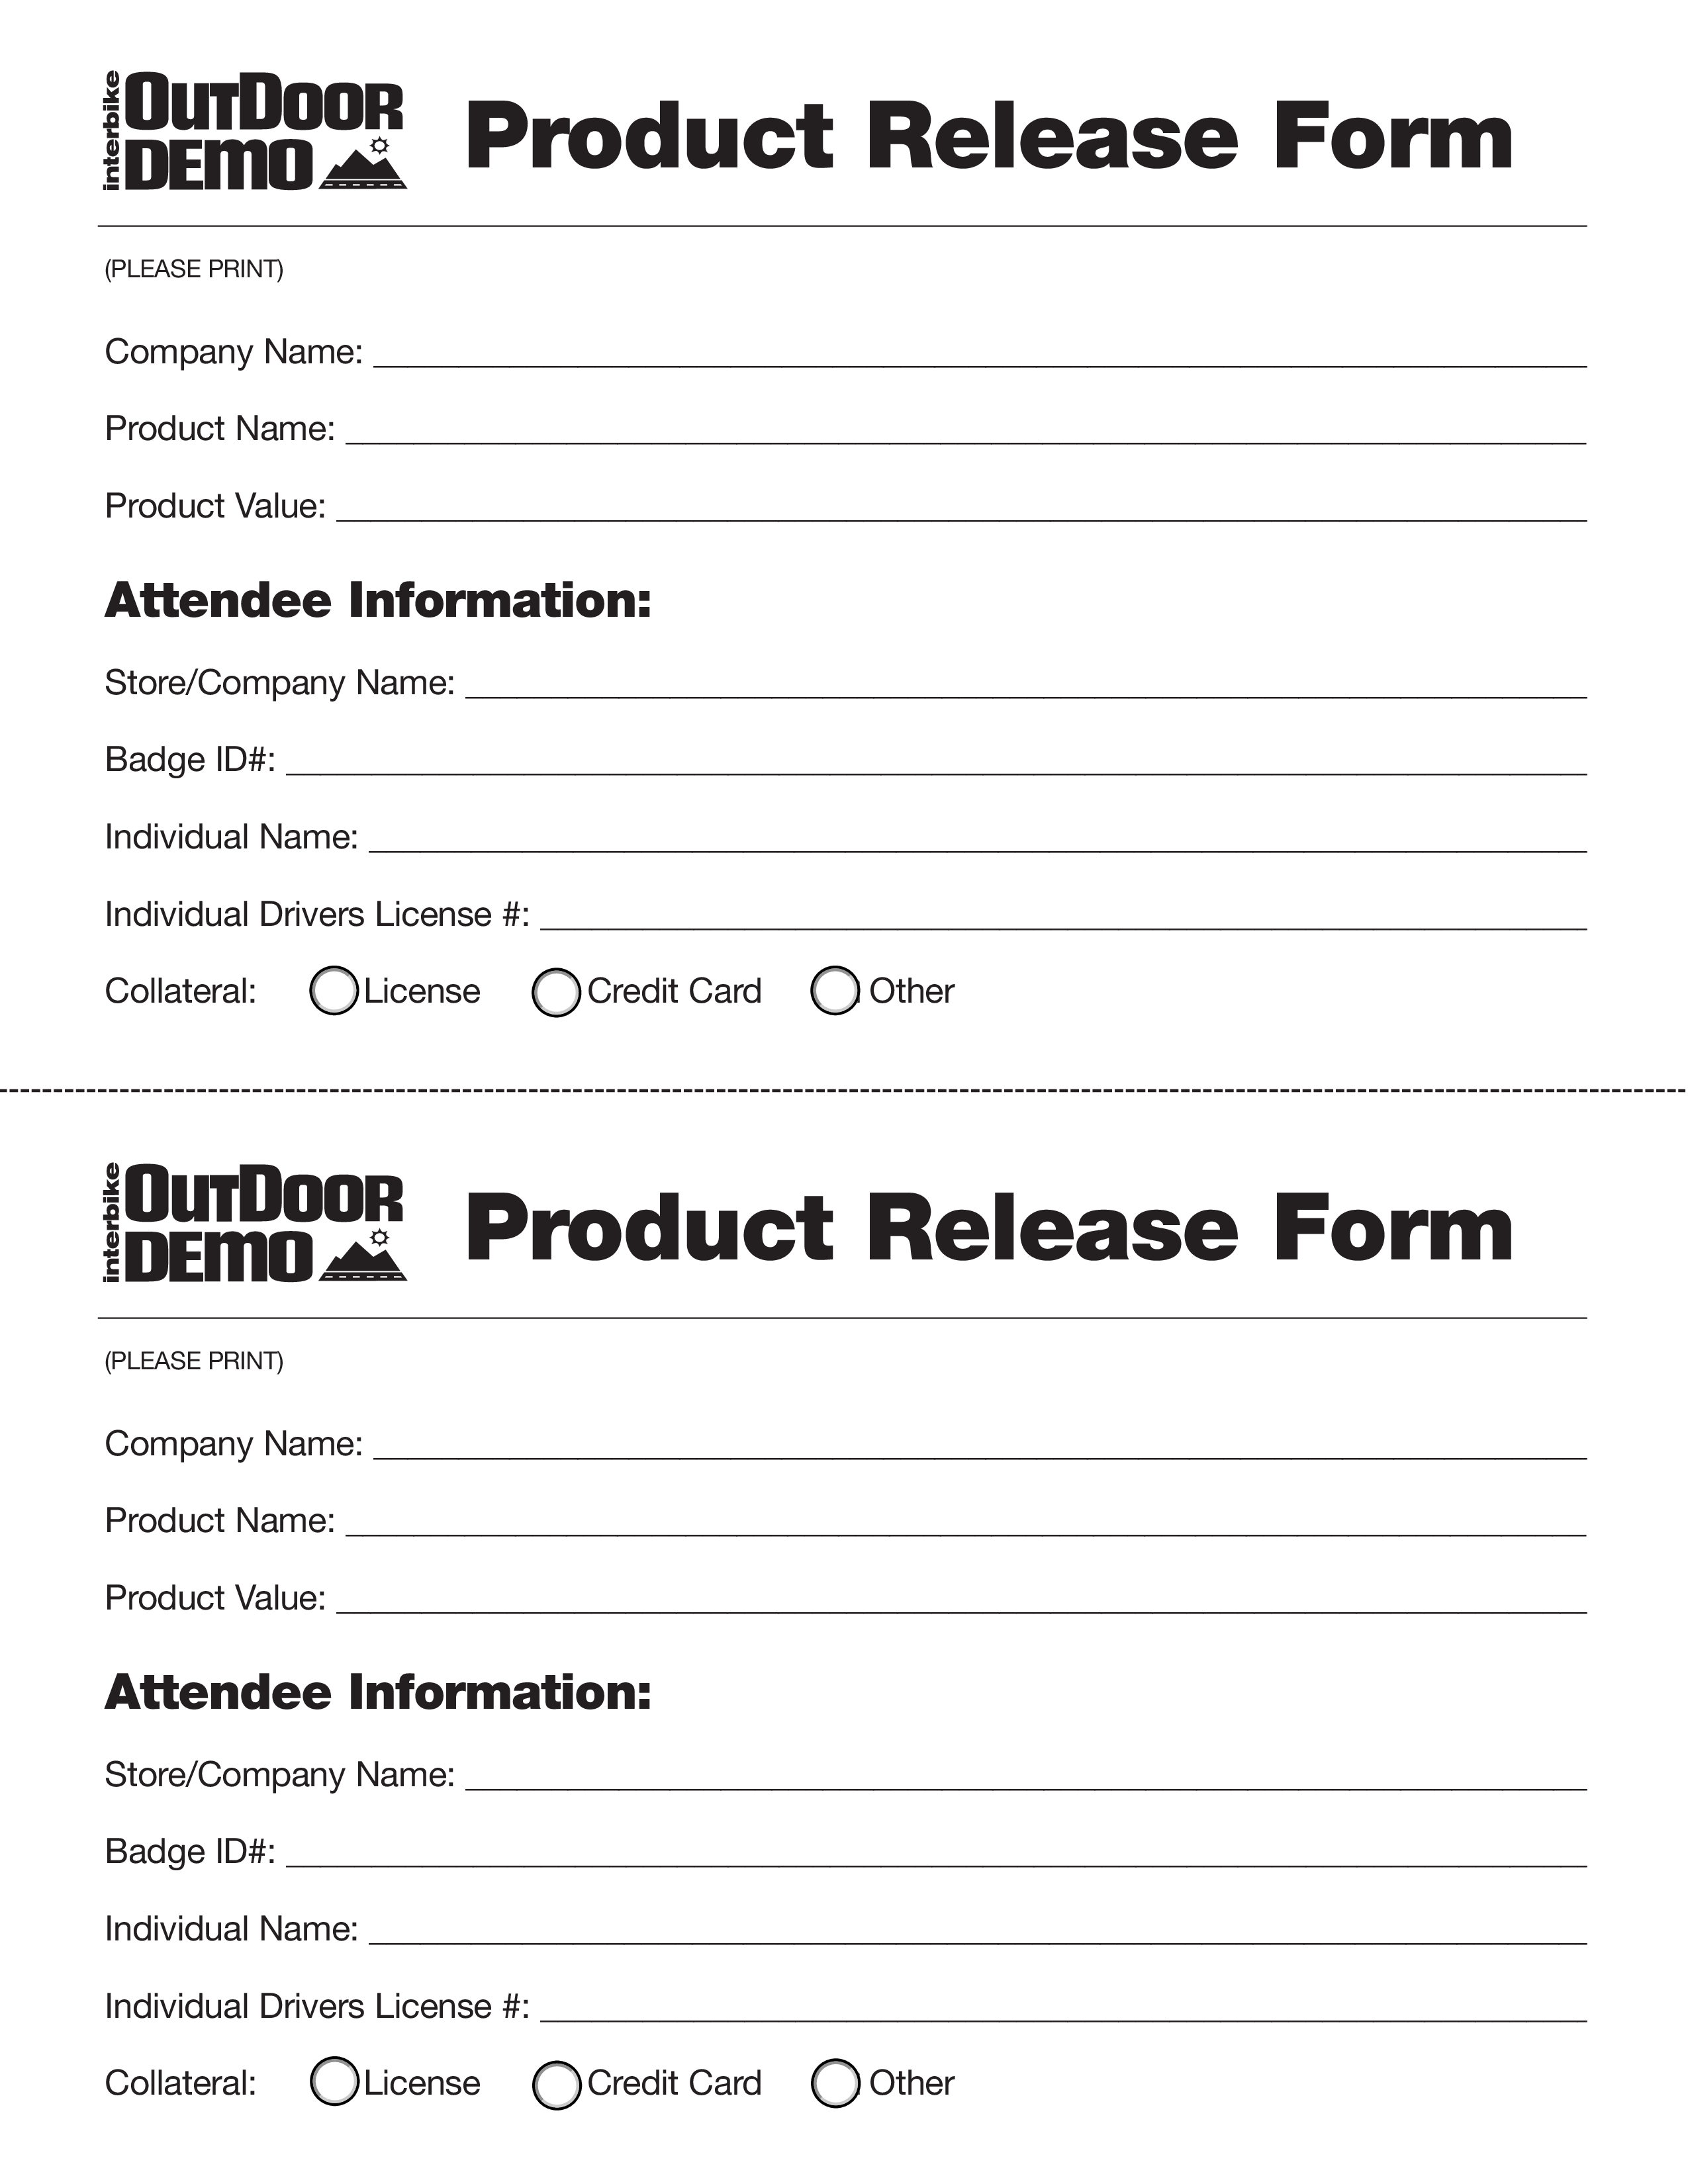 Product Release Form Templates At Allbusinesstemplates